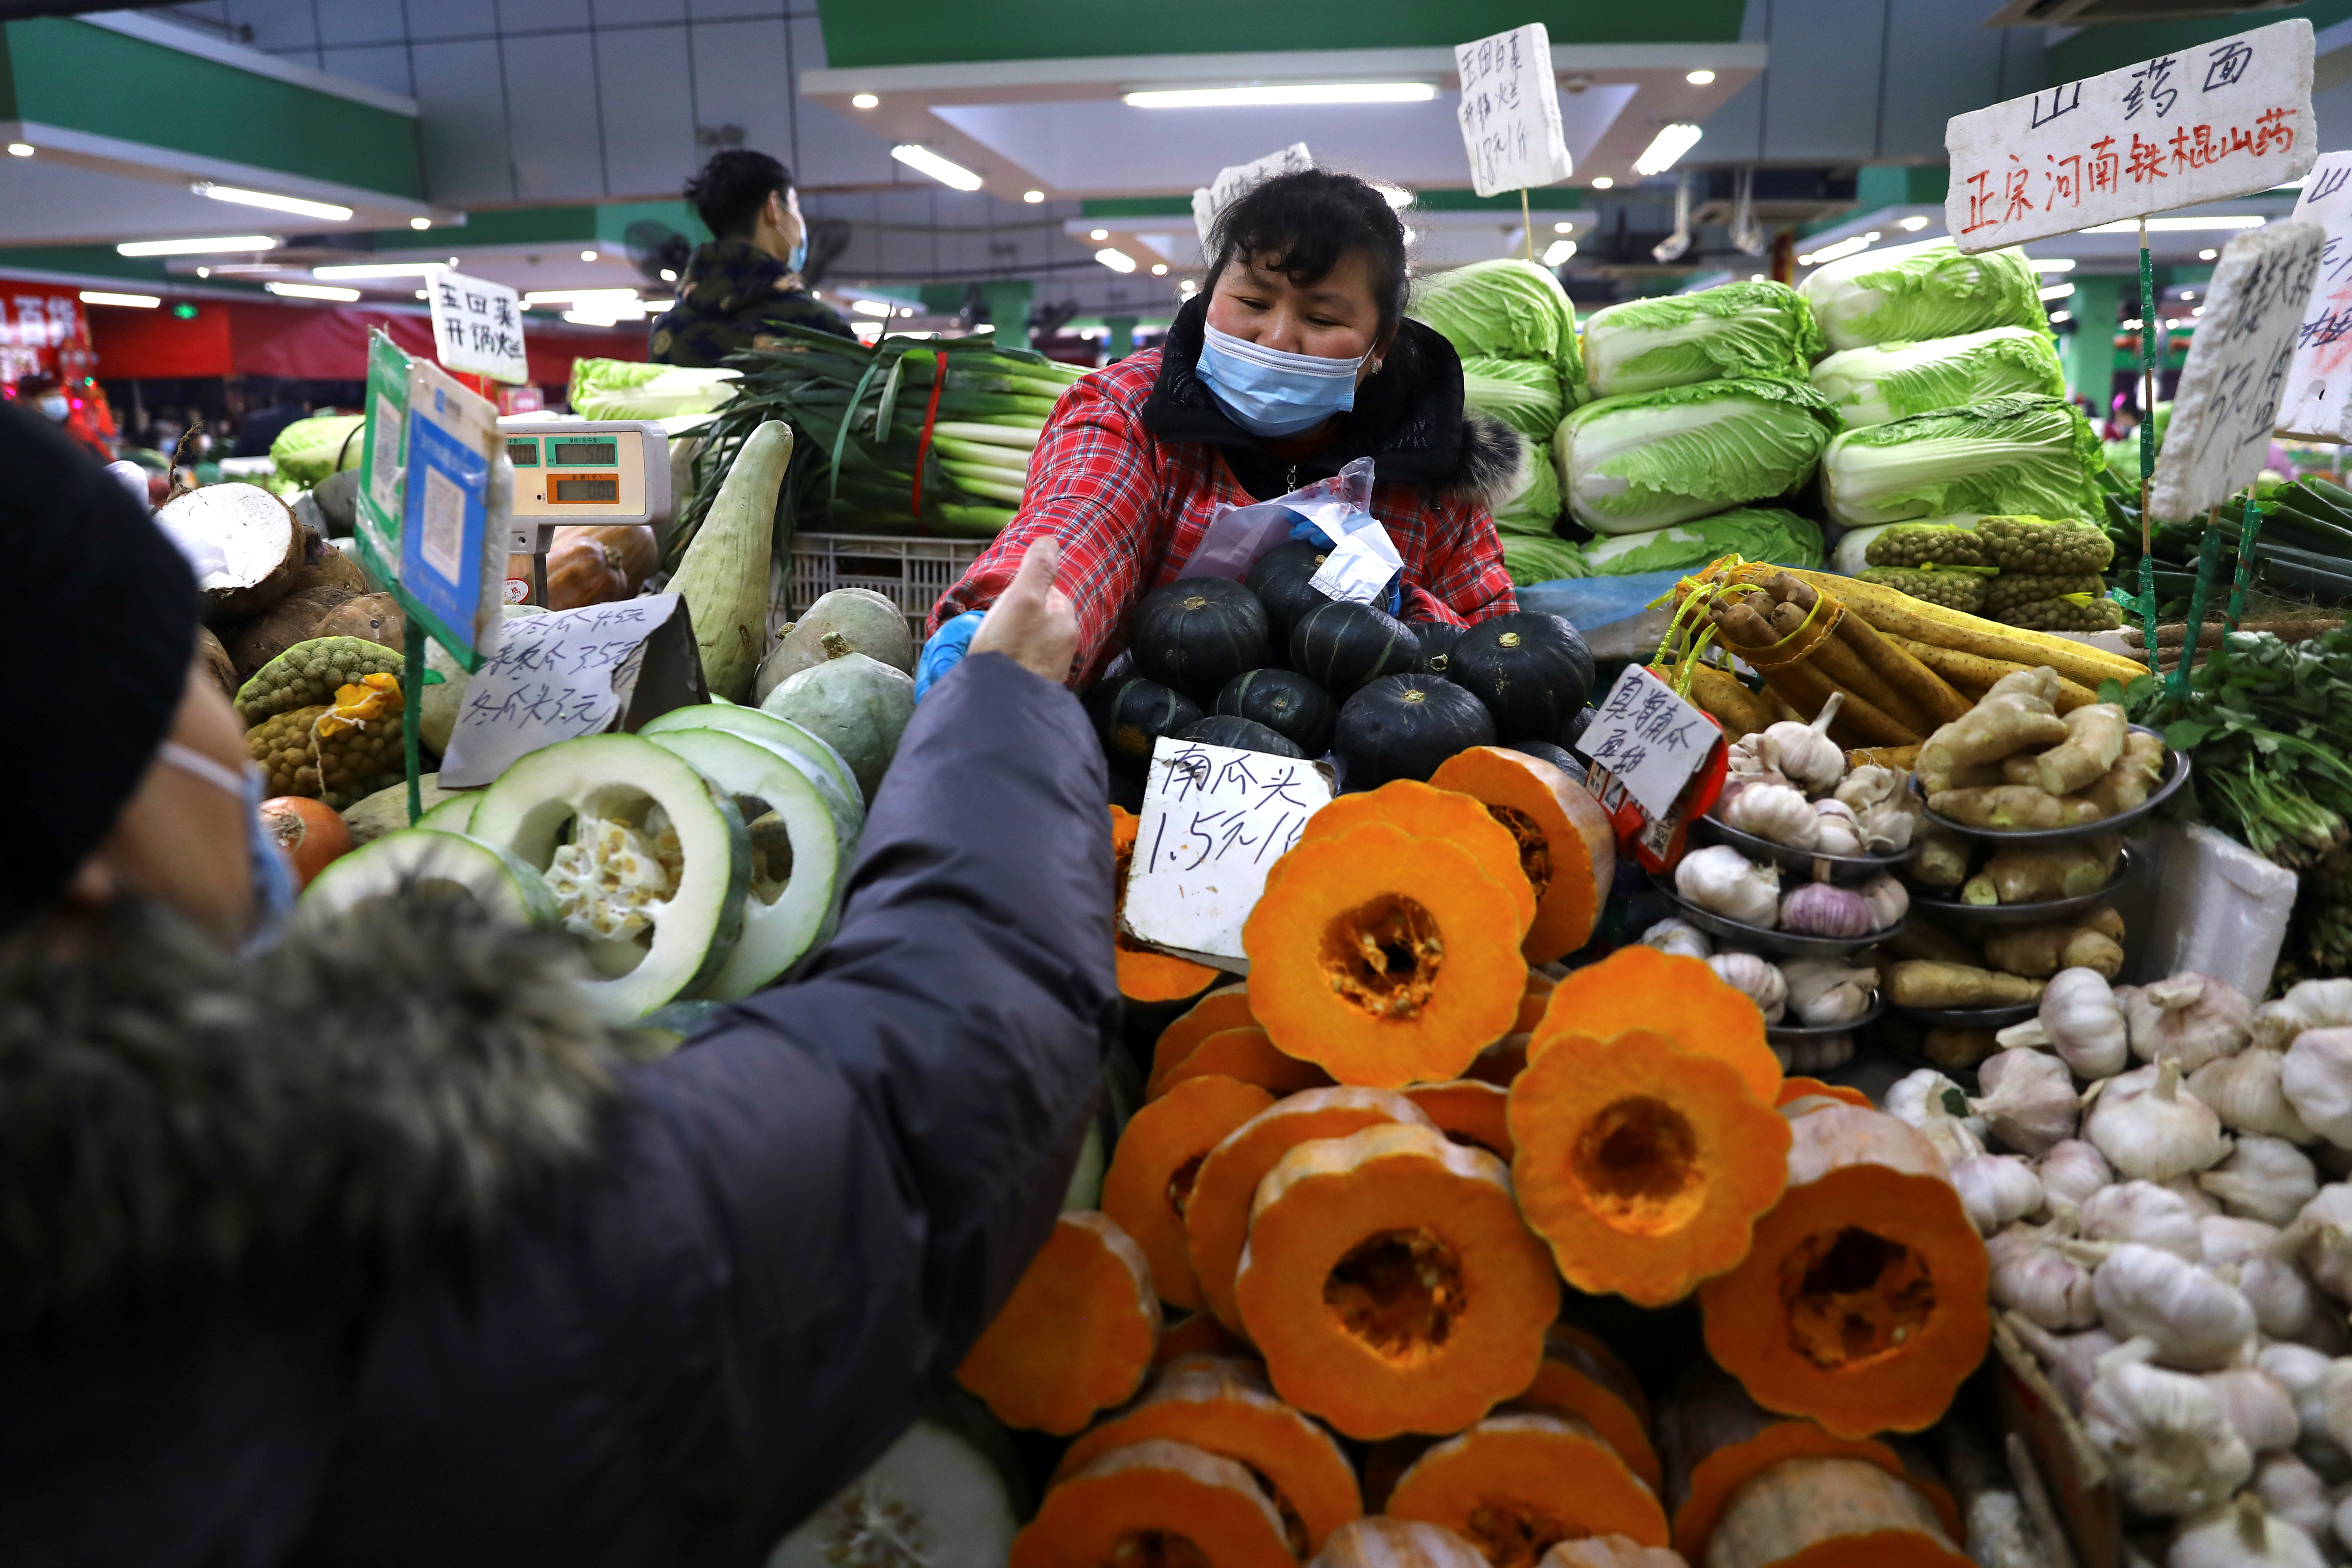 A customer buys vegetables at a stall inside a morning market in Beijing